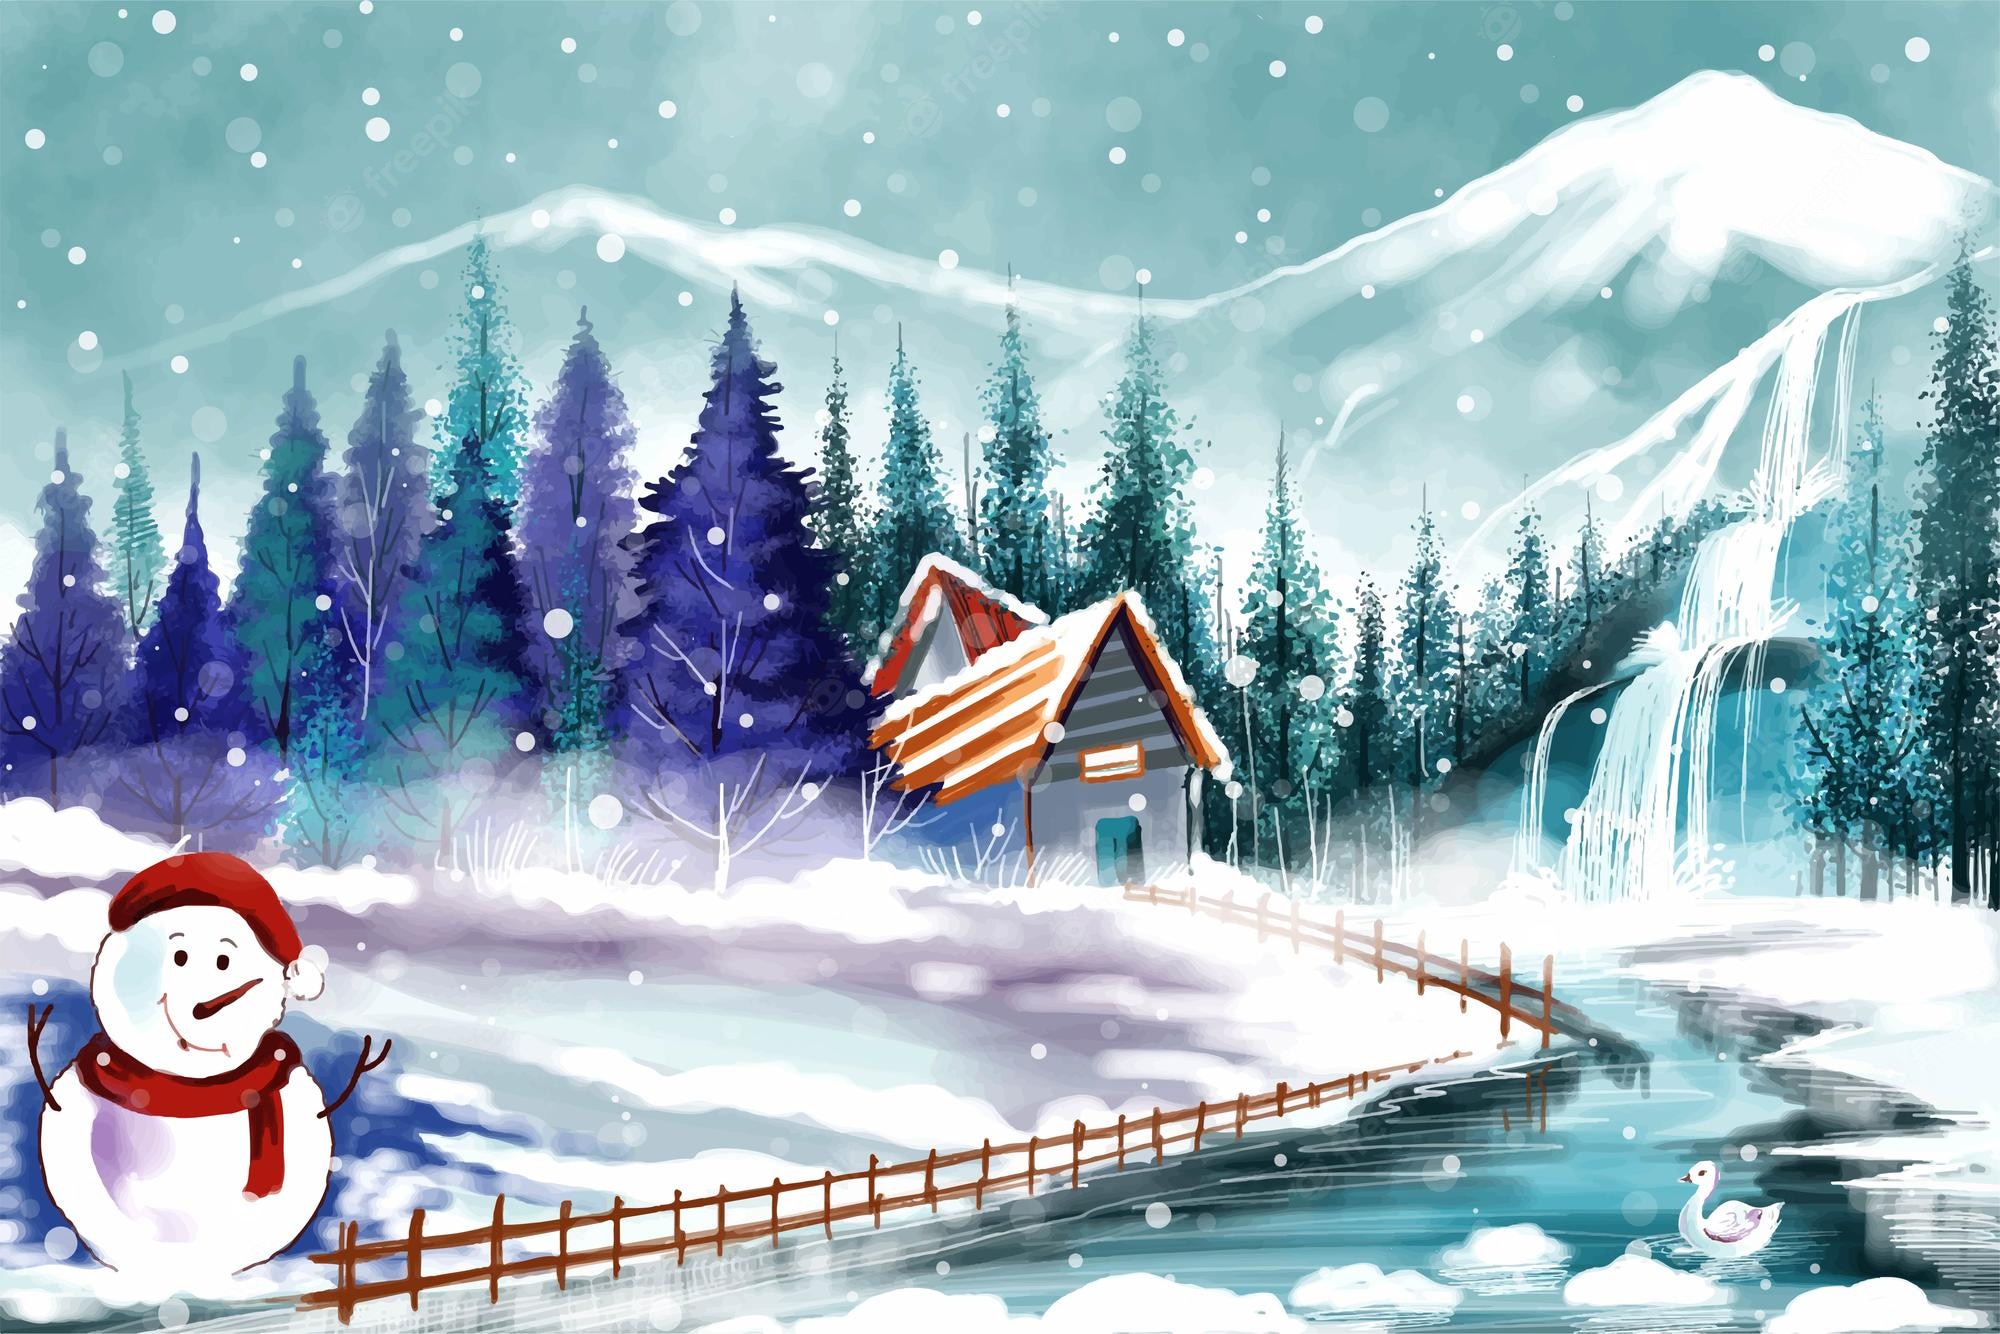 Christmas forest Image. Free Vectors, & PSD